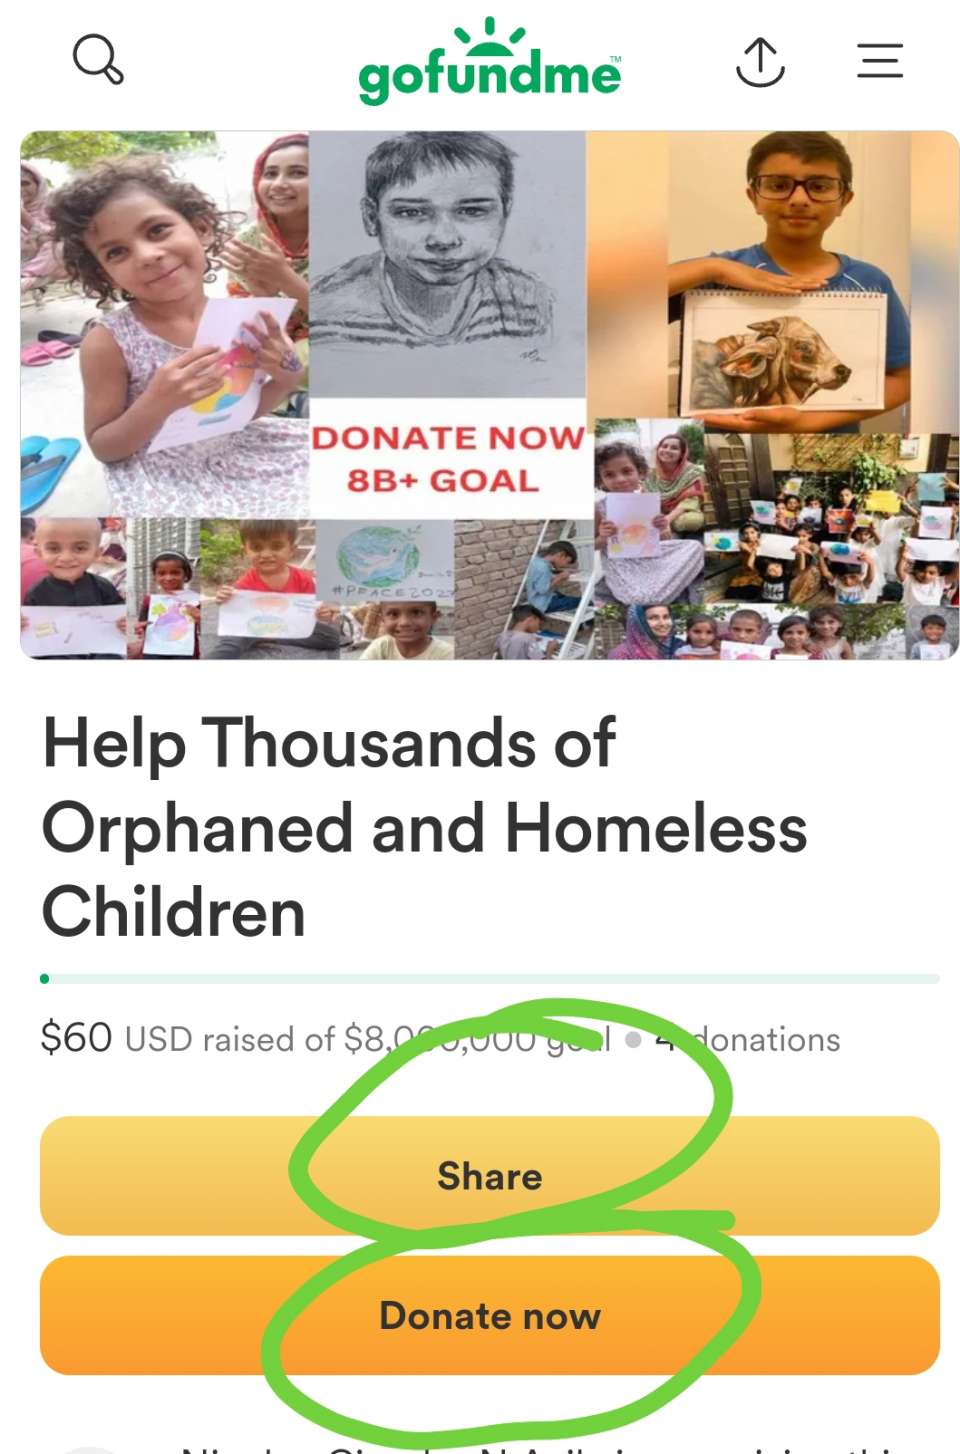 Hi it needs your 5+ shares Today and/or donation 👍 can you do it happily?<br /><br /> thank you very much my dear Global family 🌎❤<br />for joining hands DAILY, for now we raise 60$.<br />Lets accelerate  to raiseup 1000$+ today<br />in simple steps:<br />share this Urgent campaign https://gofund.me/74b84d5b<br />in all social networks<br />at list 15 times +<br />in Facebook LinkedIn Twitter and with your friends and contacts<br />let's do a BIG IMPACT TODAY TO<br /><br /> GO VIRAL ok?<br /><br />Make a donation 1$+ by possibility today and write your heart 💖 touching  support message today on GoFoundme<br />Please put + to this message who SHARE this today<br /><br />Enjoy Video REPORT  https://youtu.be/bTNCgRA0vlg<br />IMPORTANT In the bright memory of Daniil, year around Famous drawing Contest for #Peace2027 is held, as Daniil has been drawing #PeacePictures in last days, we invite you to<br /><br />Happily donate today to the Daniil Foundation to support his cause https://www.gofundme.com/f/help-thousands-of-orphaned-and-homeless-children https://ivacademy.net/en/donate  <br /><br />Enjoy Sharing today this foundation with friends and wide in social networks to GRANT you and  all 8B+ people participate and complete ultimate Global peace building by 2027 in every country ok?<br /><br />Yours @Prophet Nicolae Cirpala +79811308385 Tel WhatsApp❤